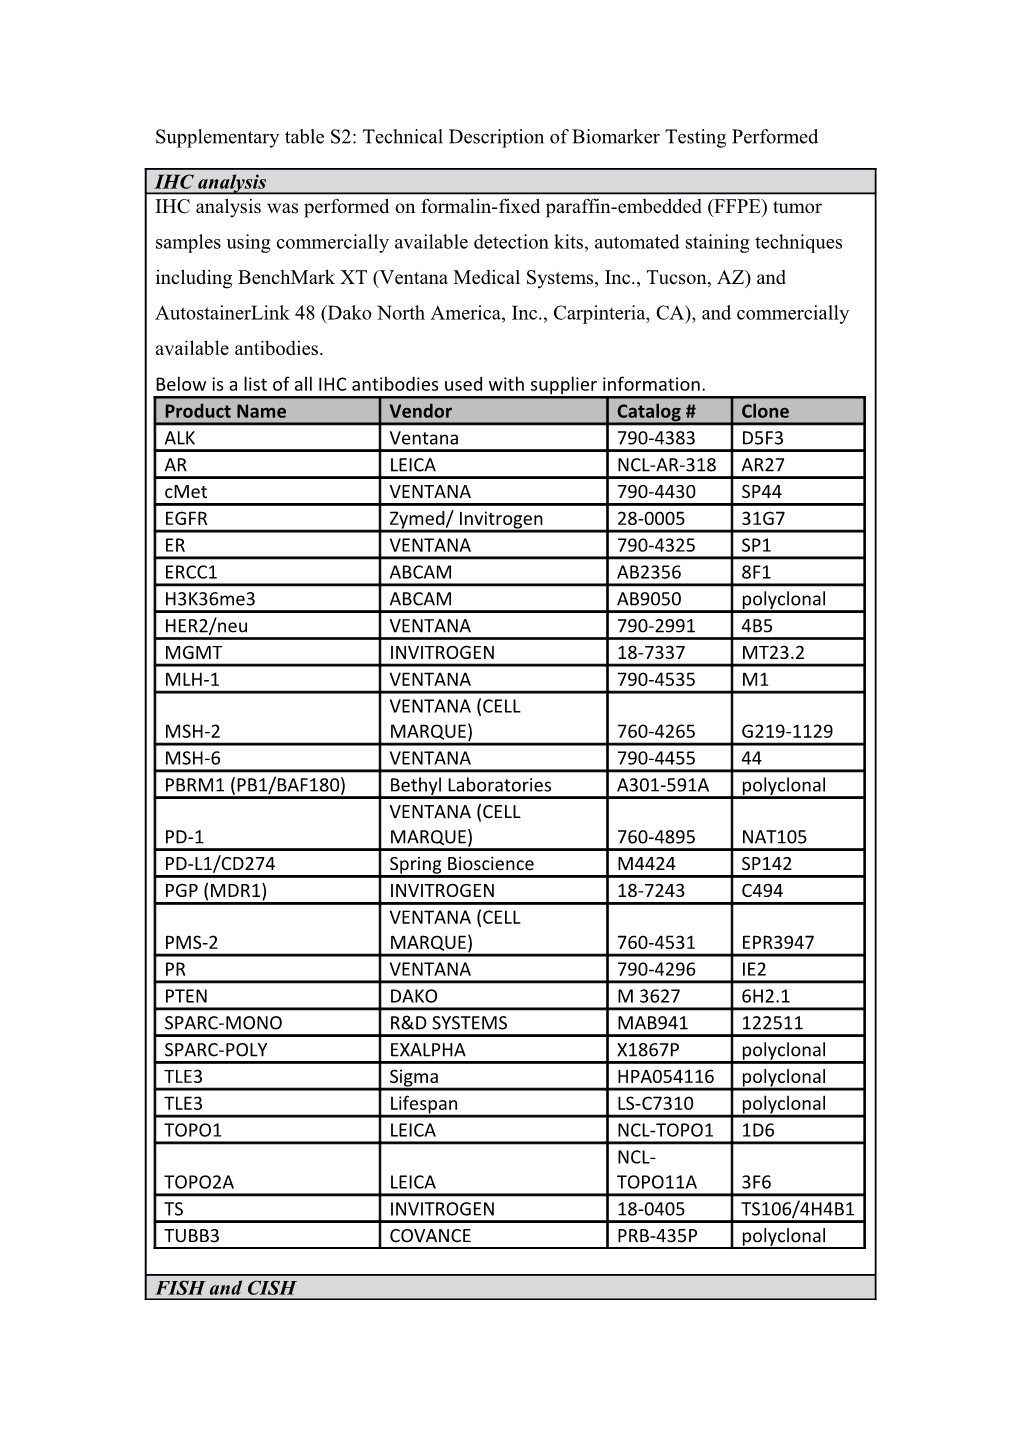 Supplementary Table S2: Technical Description of Biomarker Testing Performed